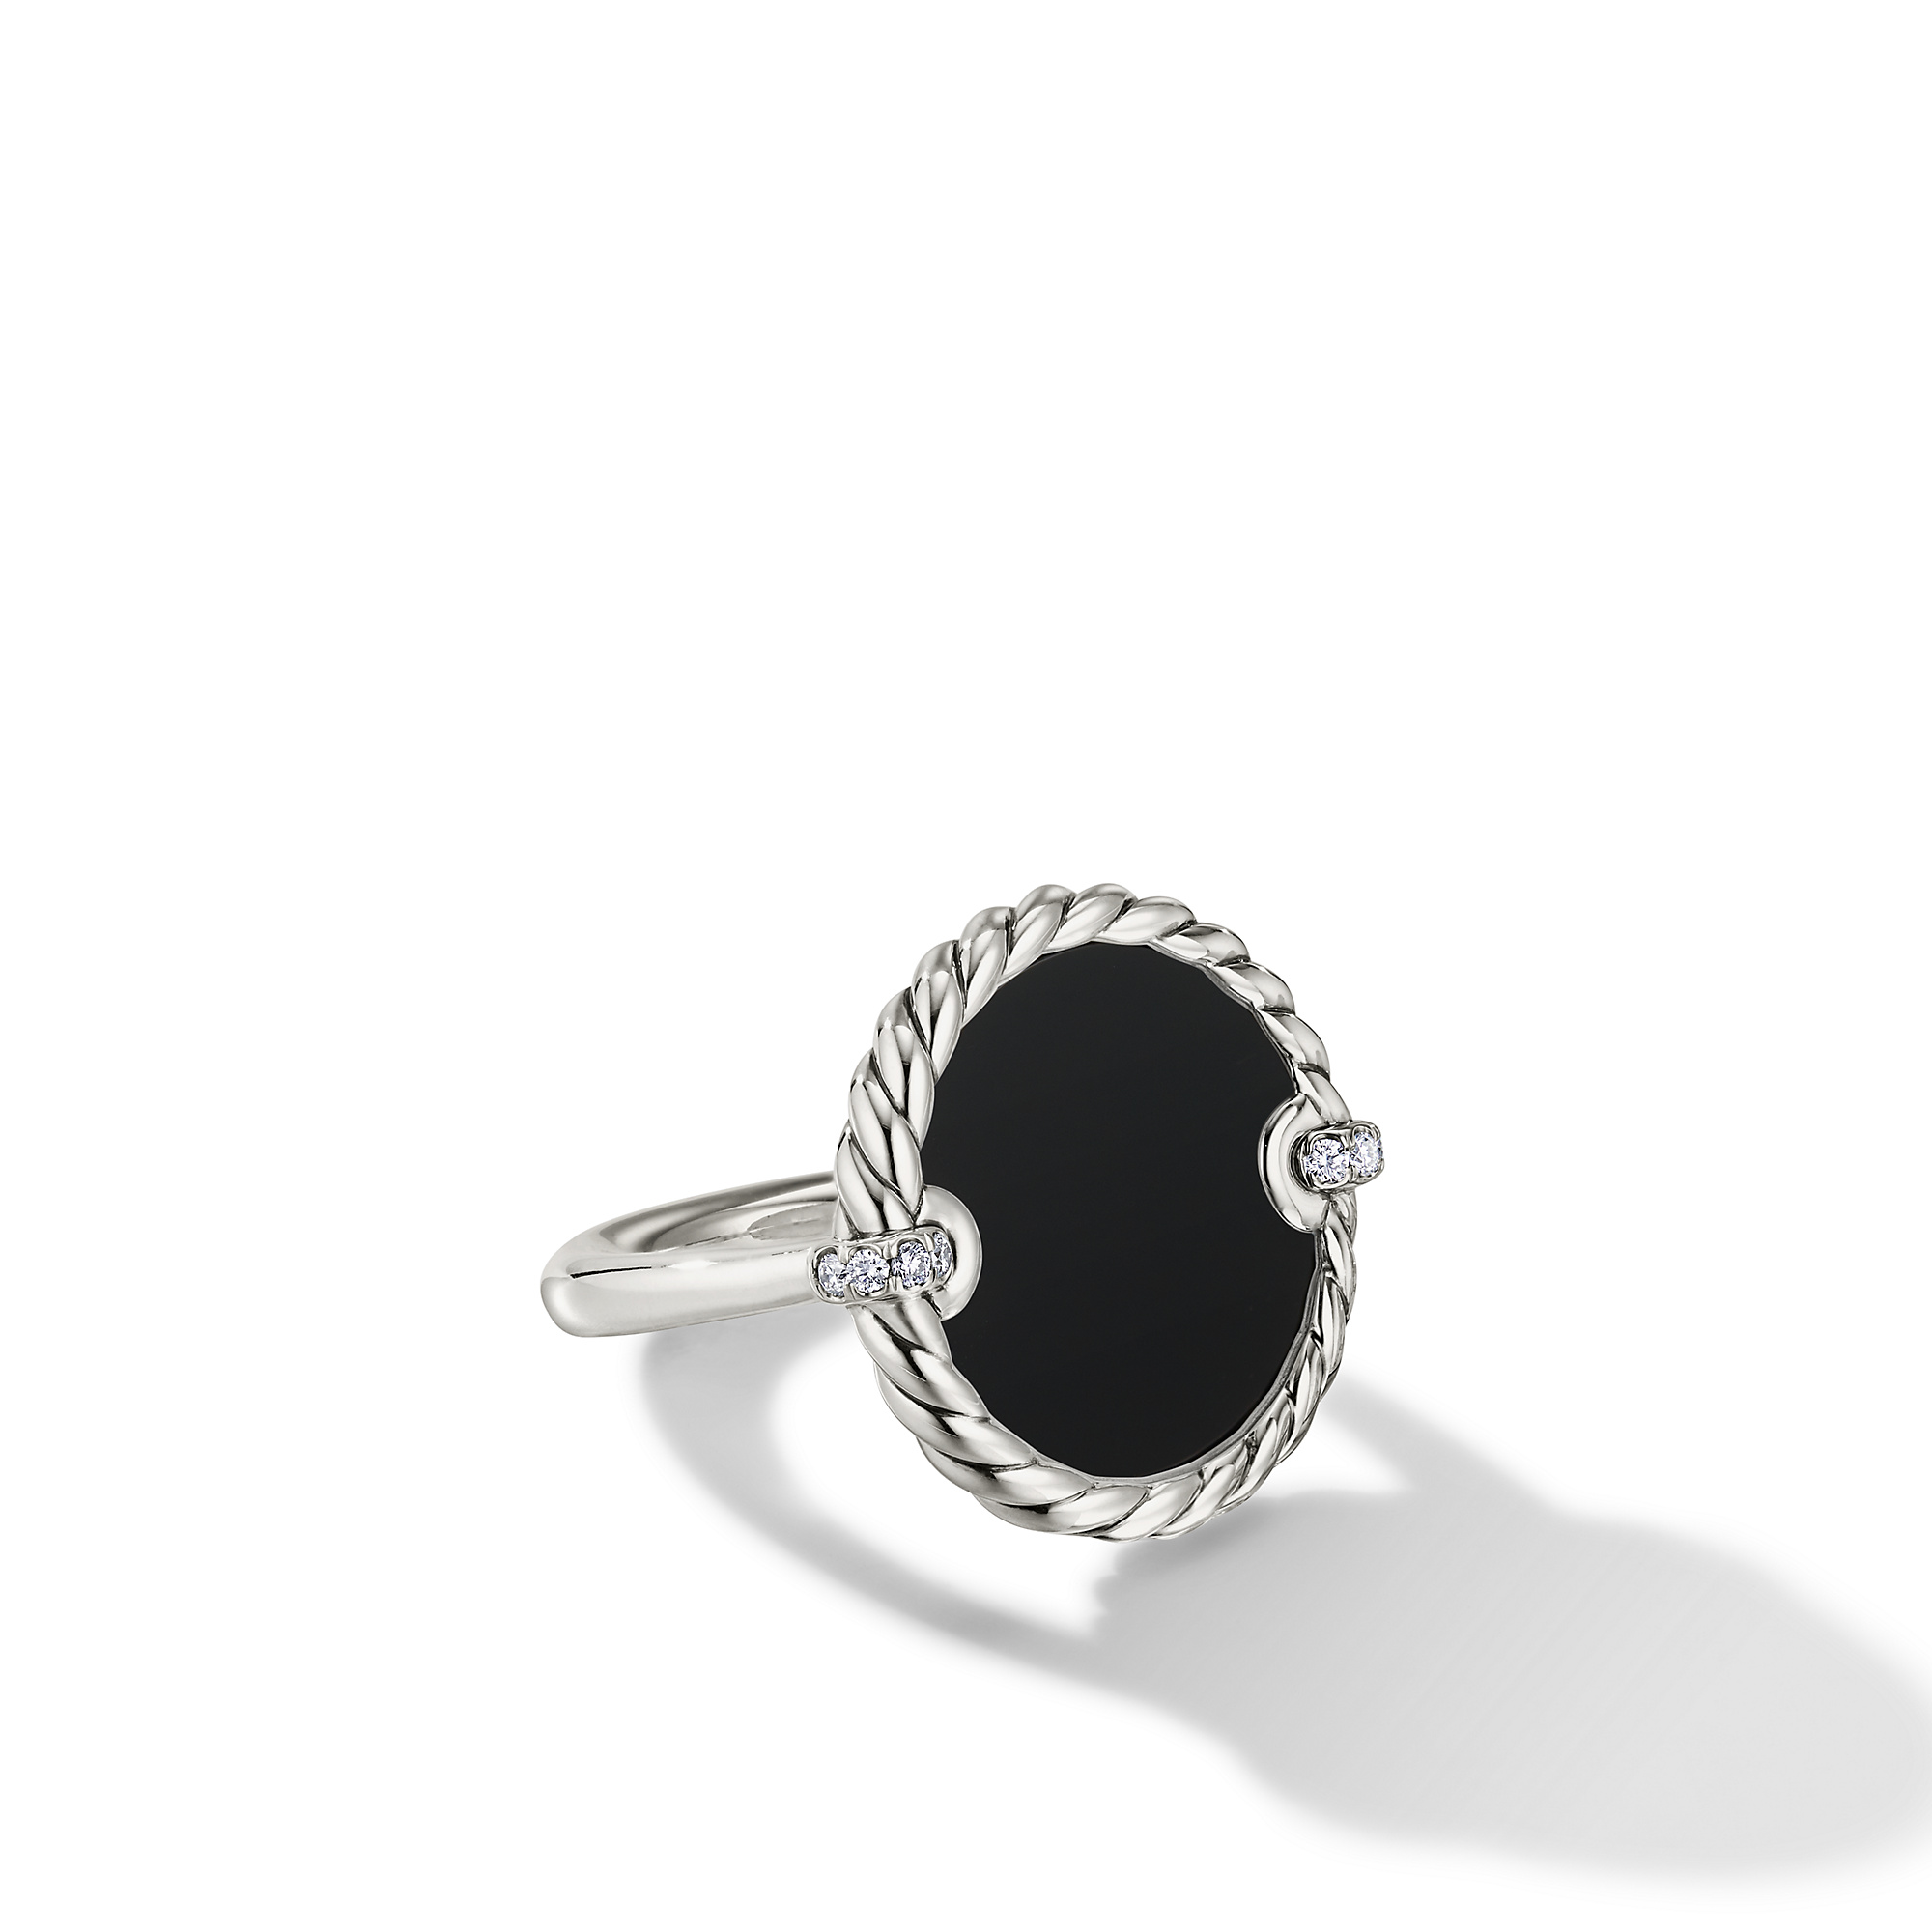 DY Elements Ring with Black Onyx and Pave Diamonds